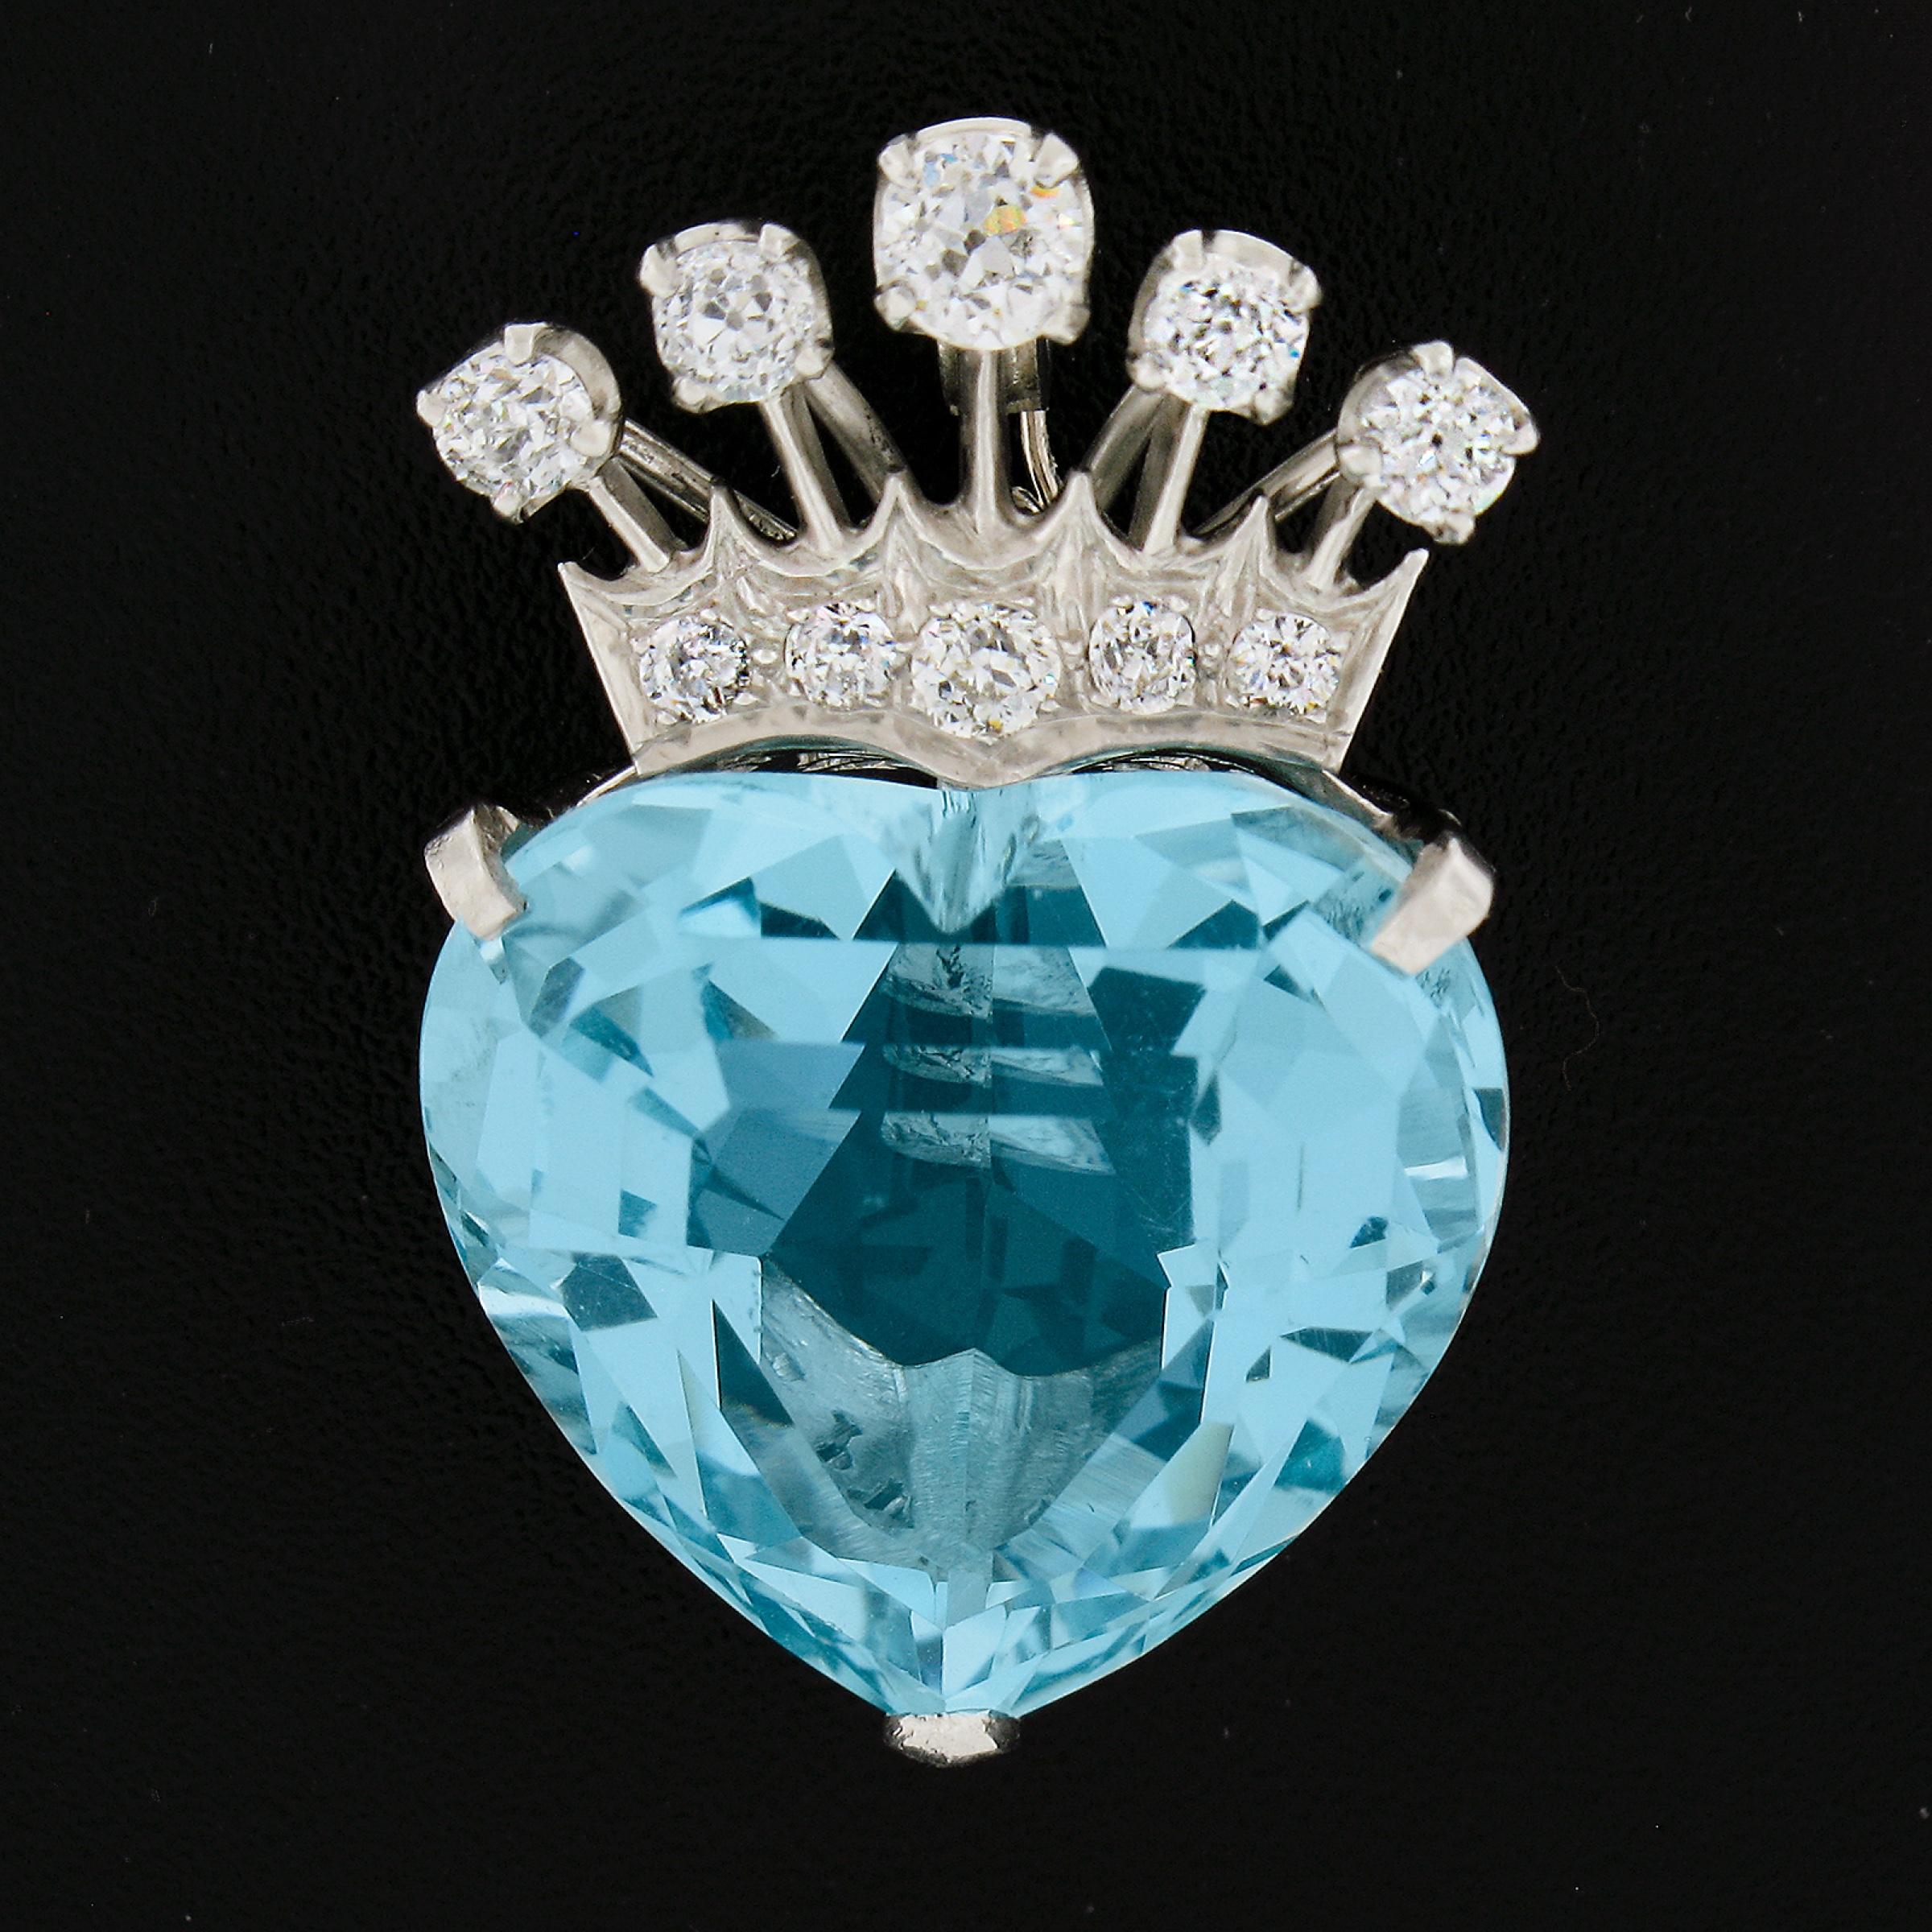 --Stone(s):--
(1) Natural Genuine Aquamarine - Heart Cut - Prong Set - Transparent Blue Color  
** See Certification Details Below for Complete Info ** - 21ct (approx. - based on GIA measurements)
(5) Natural Genuine Diamonds- Old European Cut -